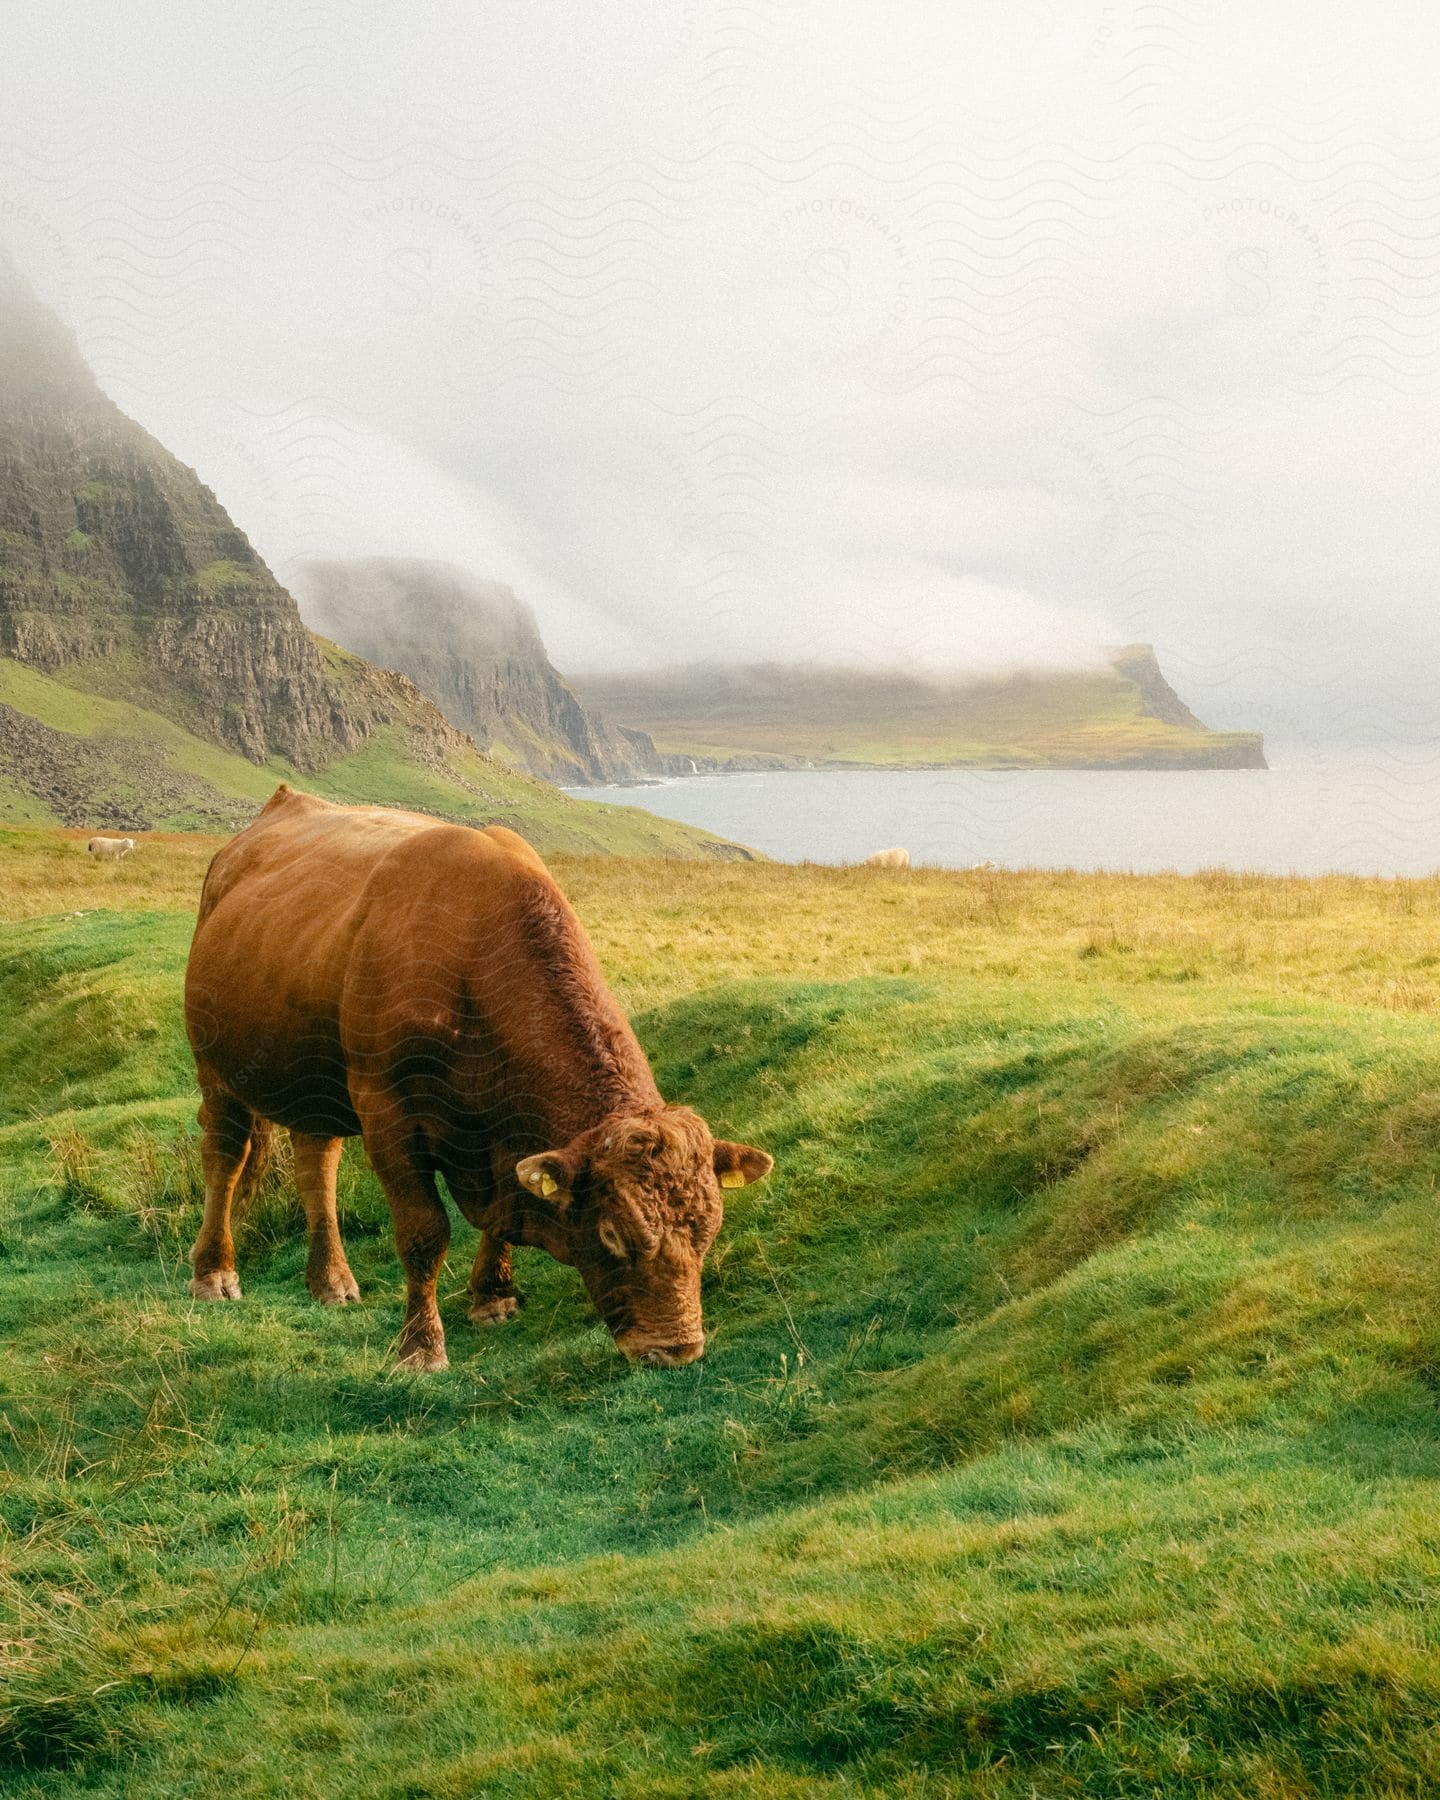 A brown cow grazing in a lush green field, with steep, Rocky Mountains in the background and a lake visible to the right.